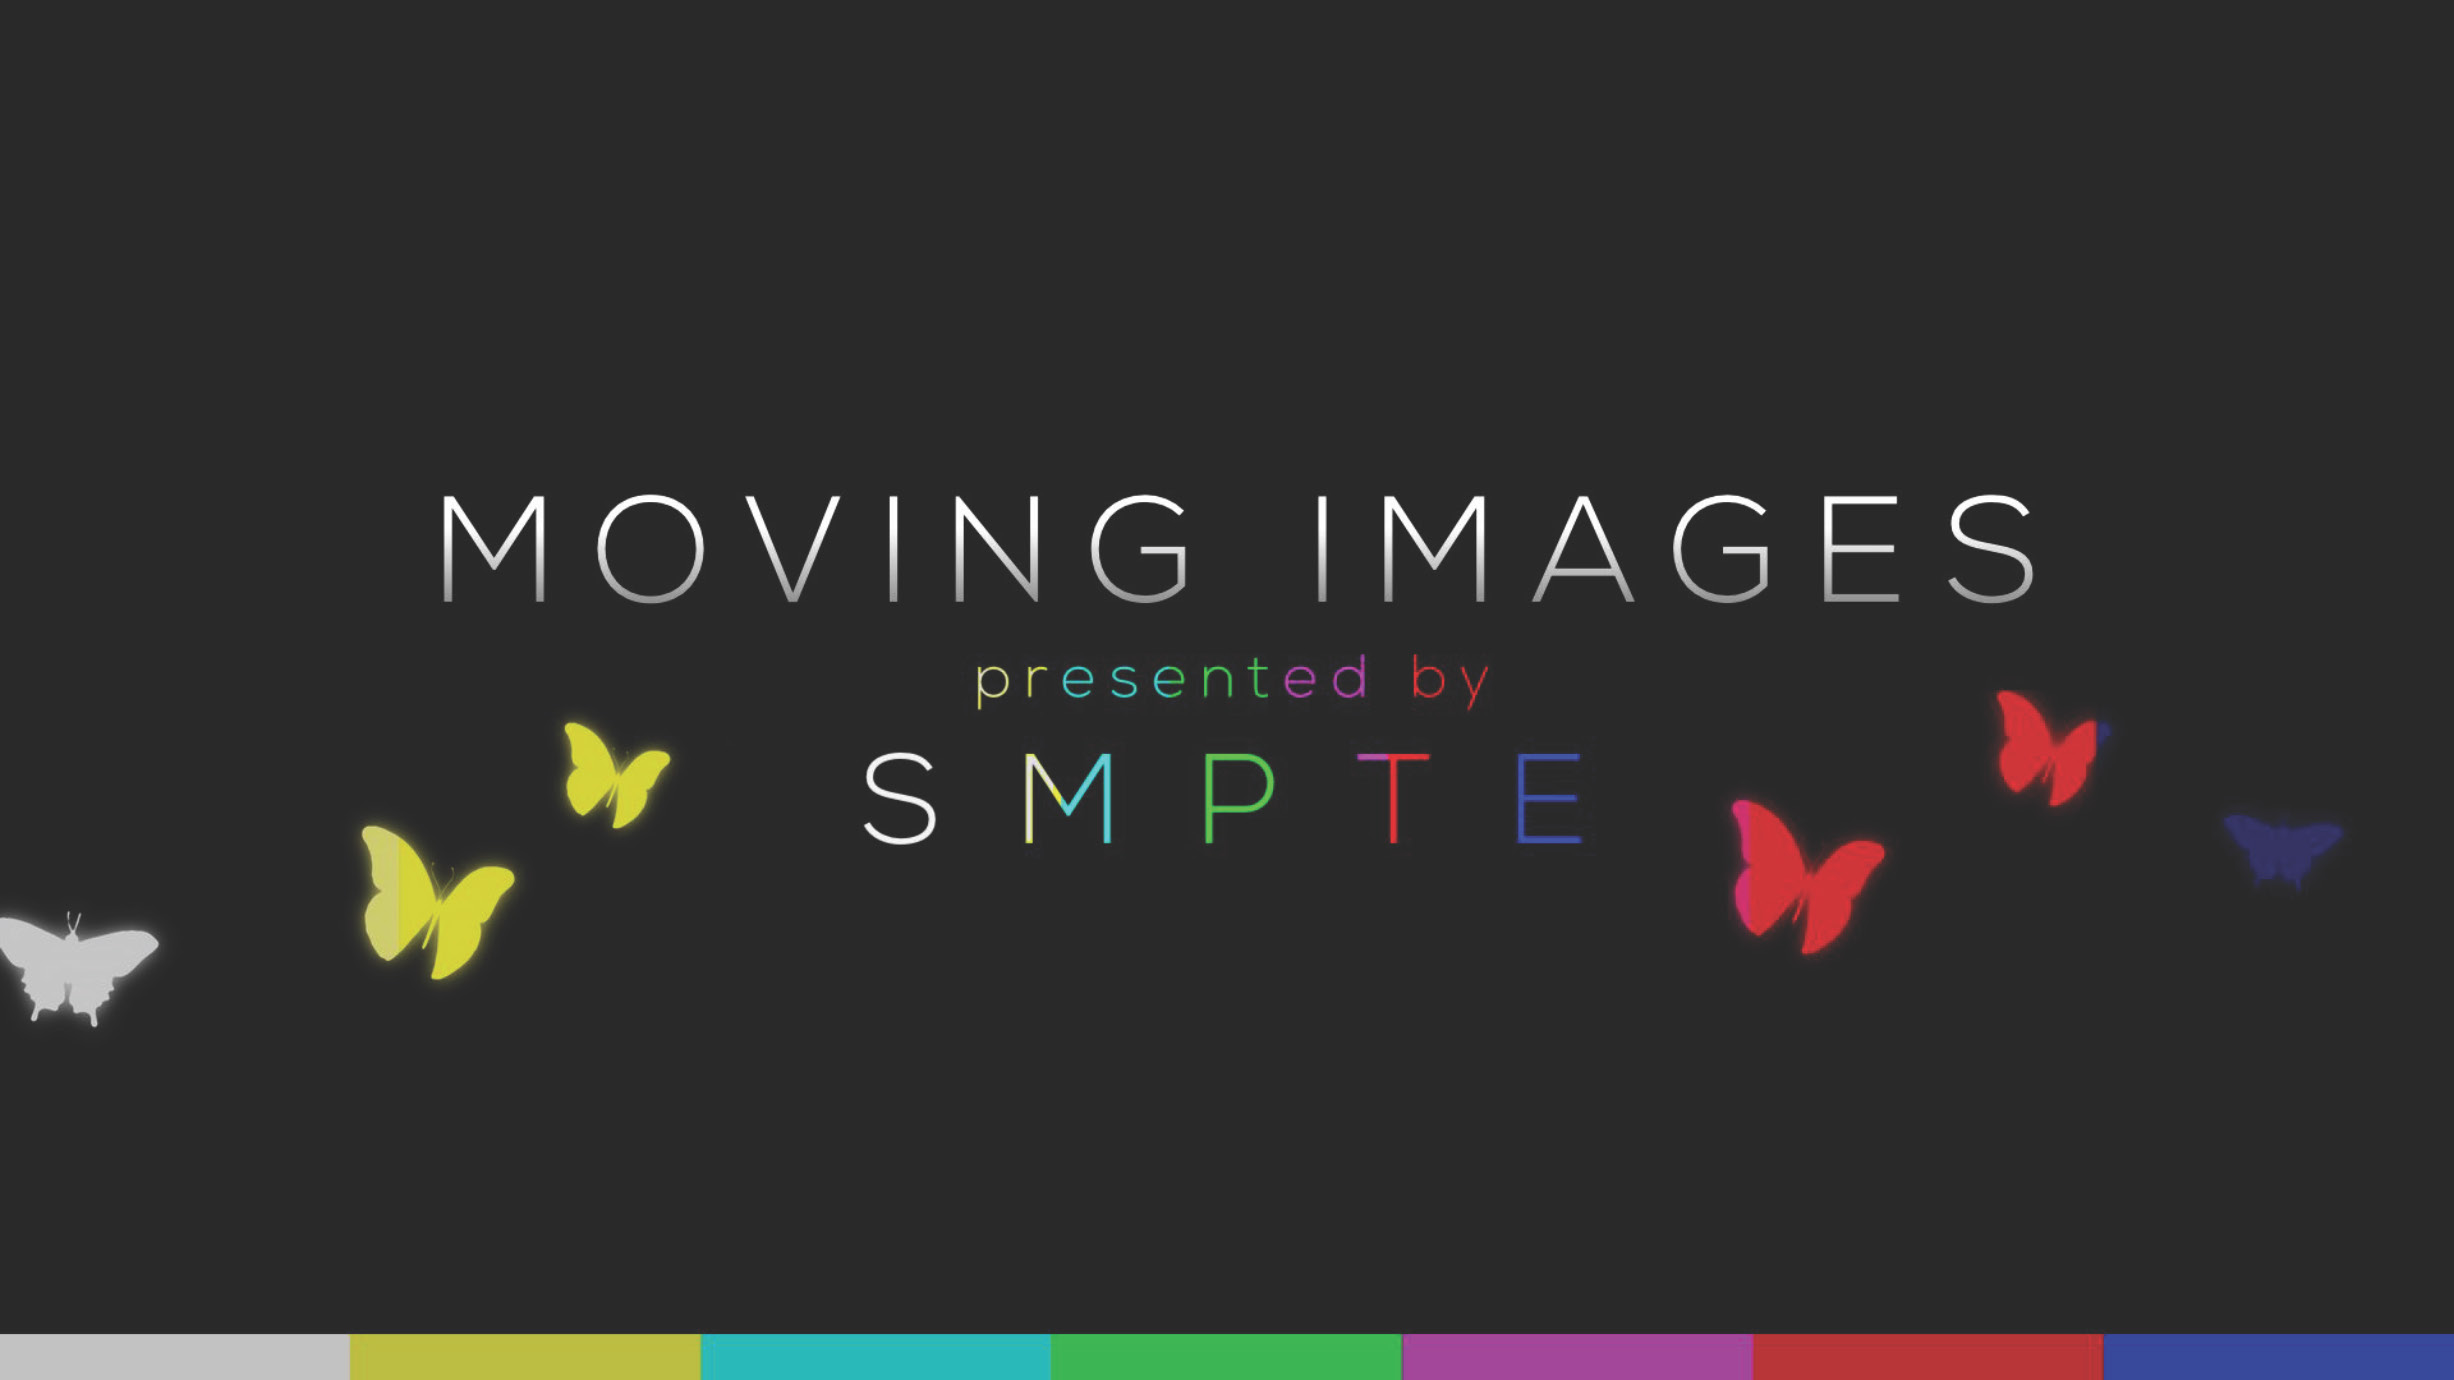 'Moving Images' - The SMPTE Documentary